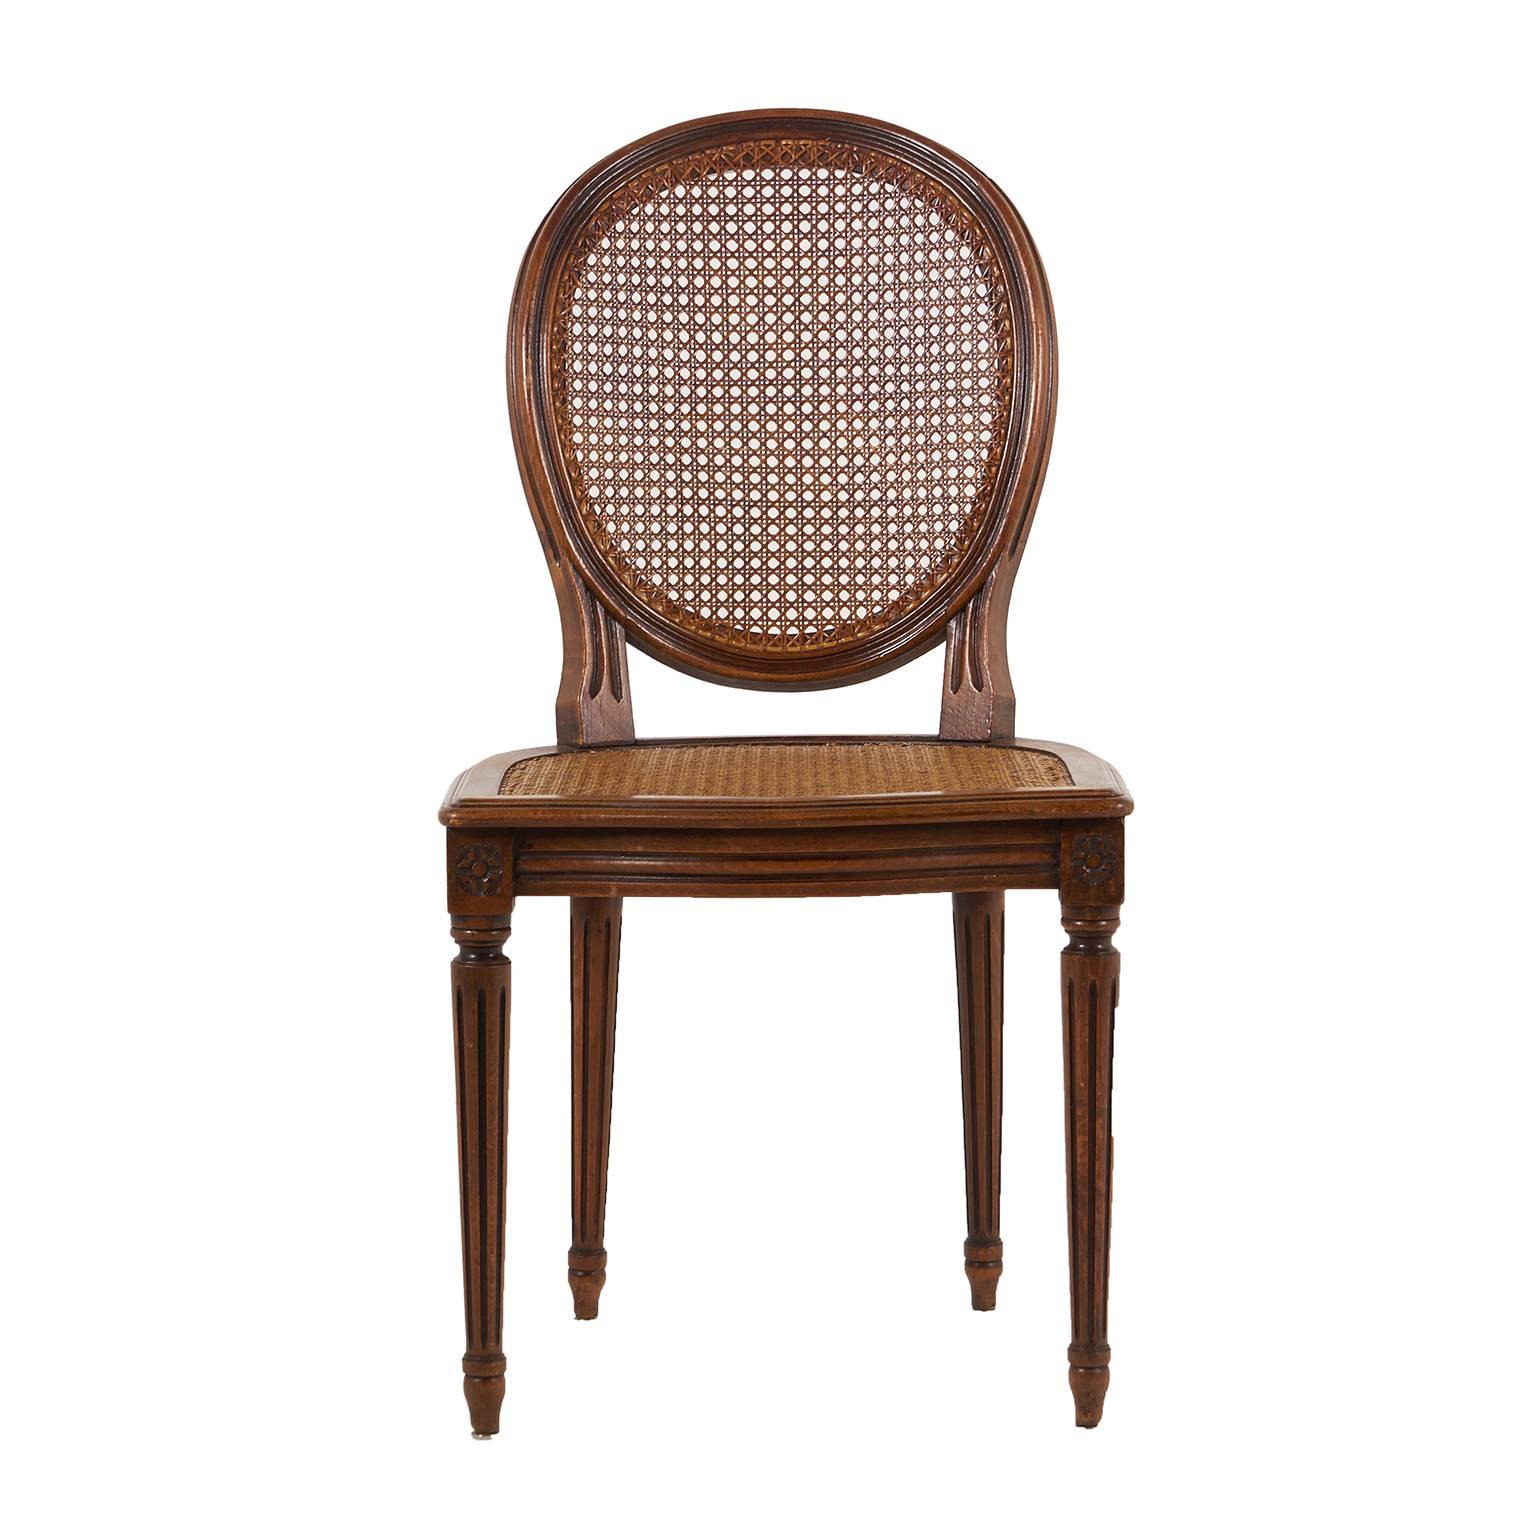 Set of 6 Louis XVI cane chairs with cameo backs. Unusually large, highly decorative, with caning in perfect condition. A good choice for everyday use.





